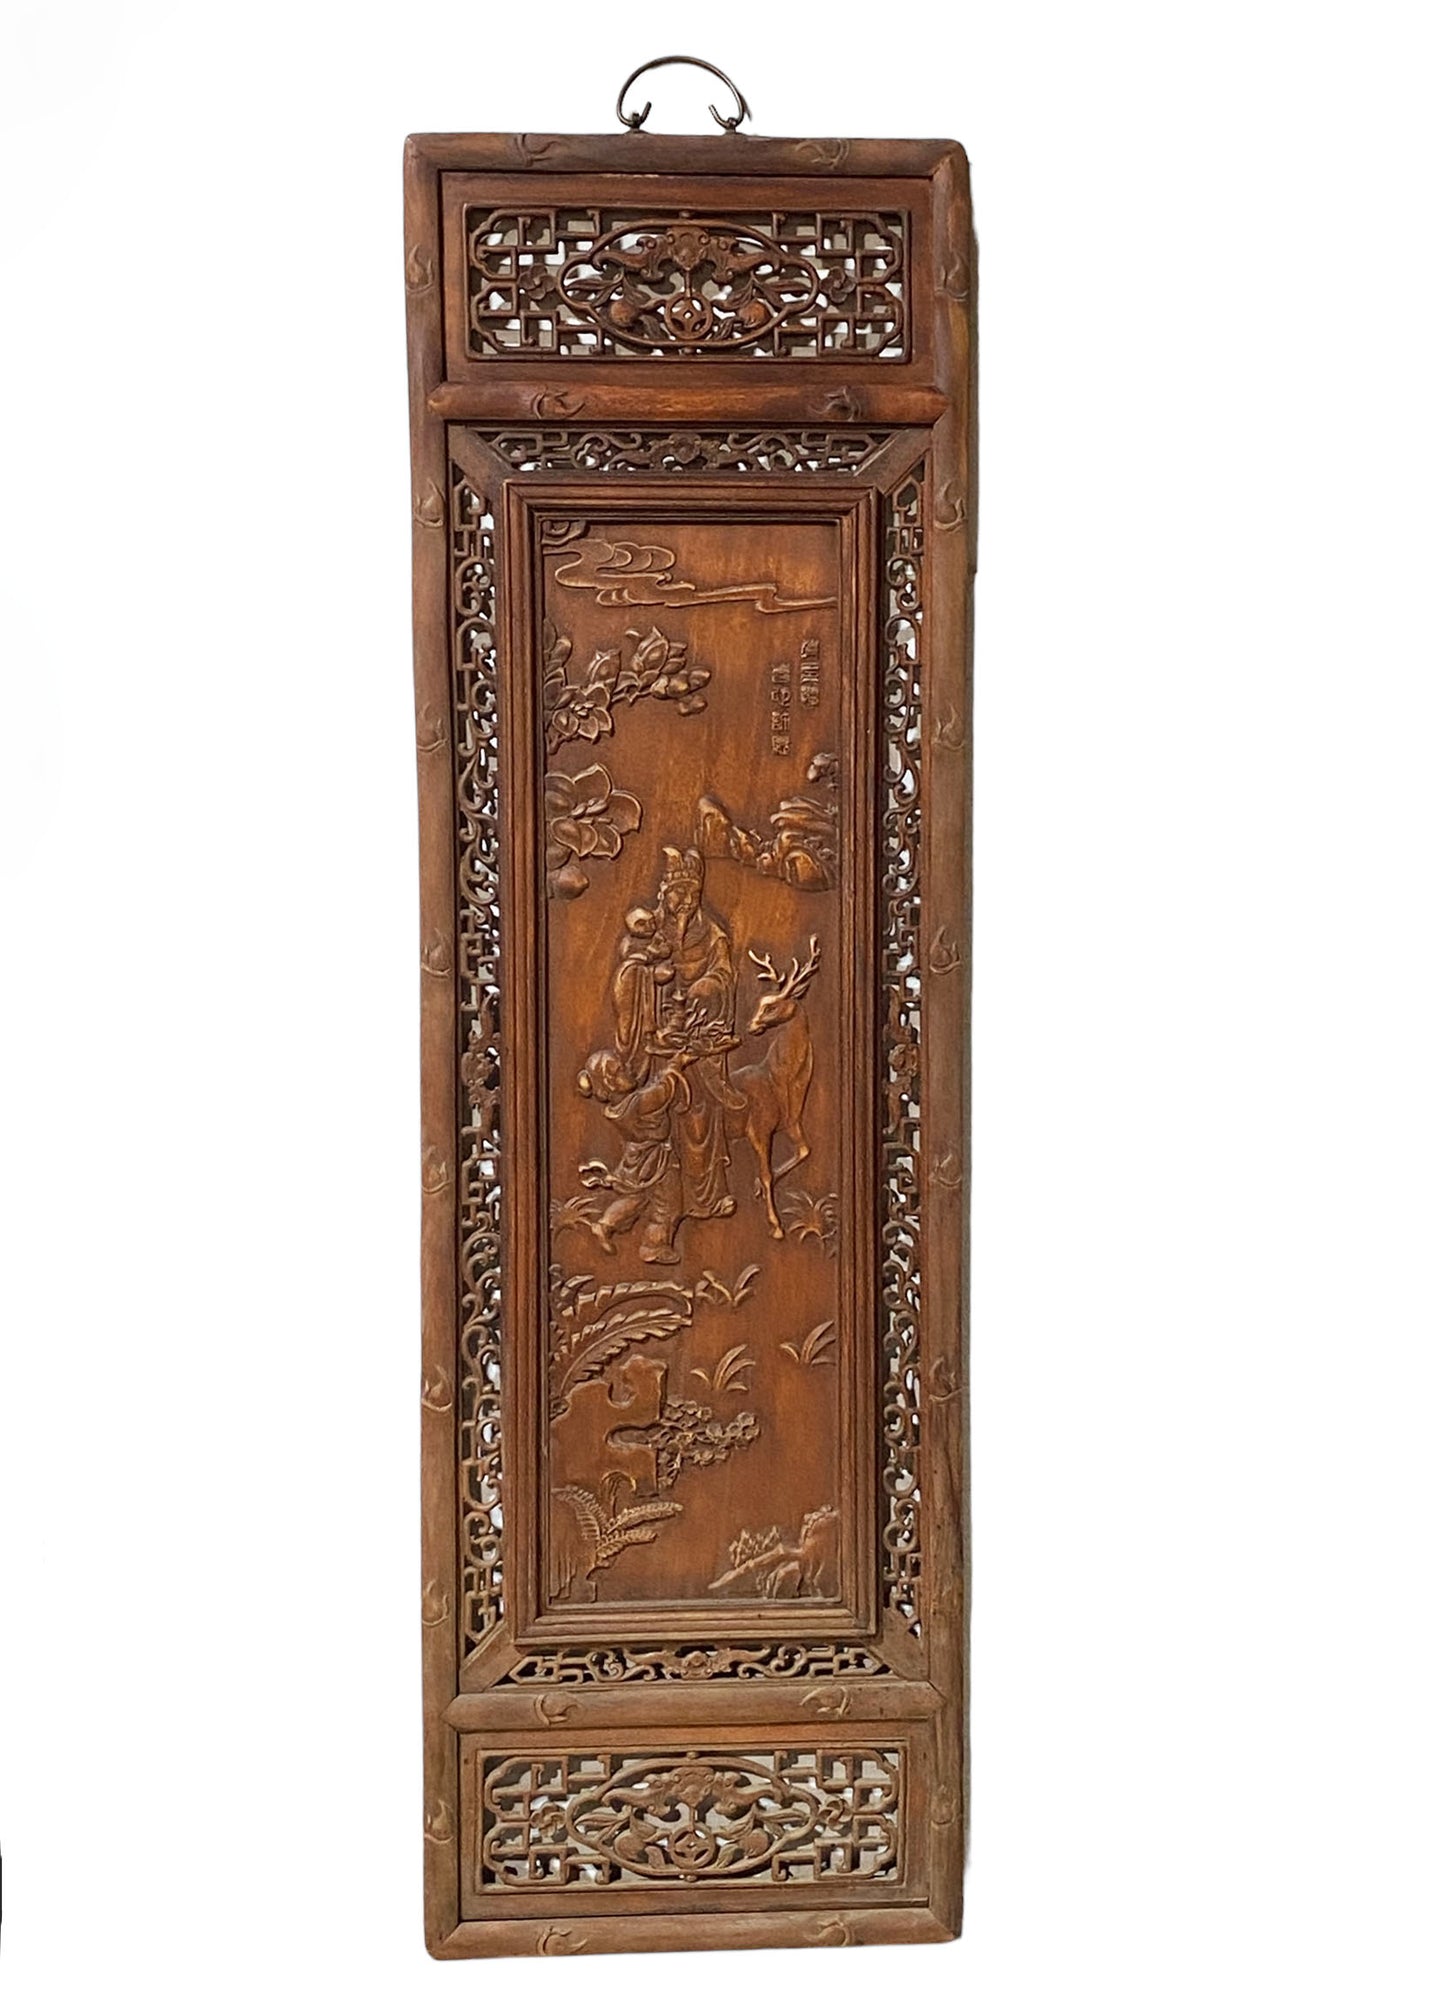 #5537 Chinoiserie Wood Wall Panel W/Figures 49" H